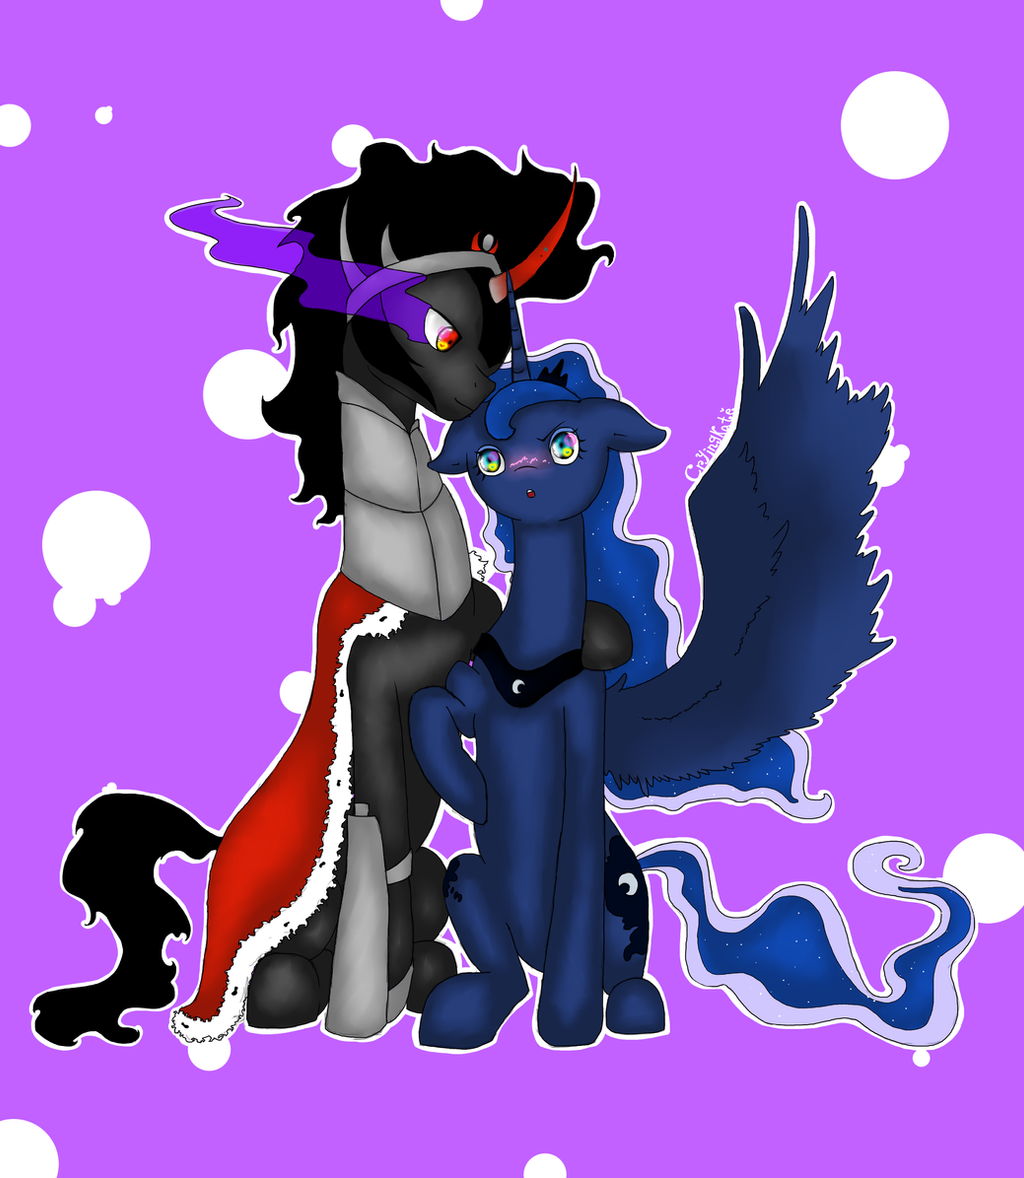 King Sombra X Princess Luna By CryingKate On DeviantArt.